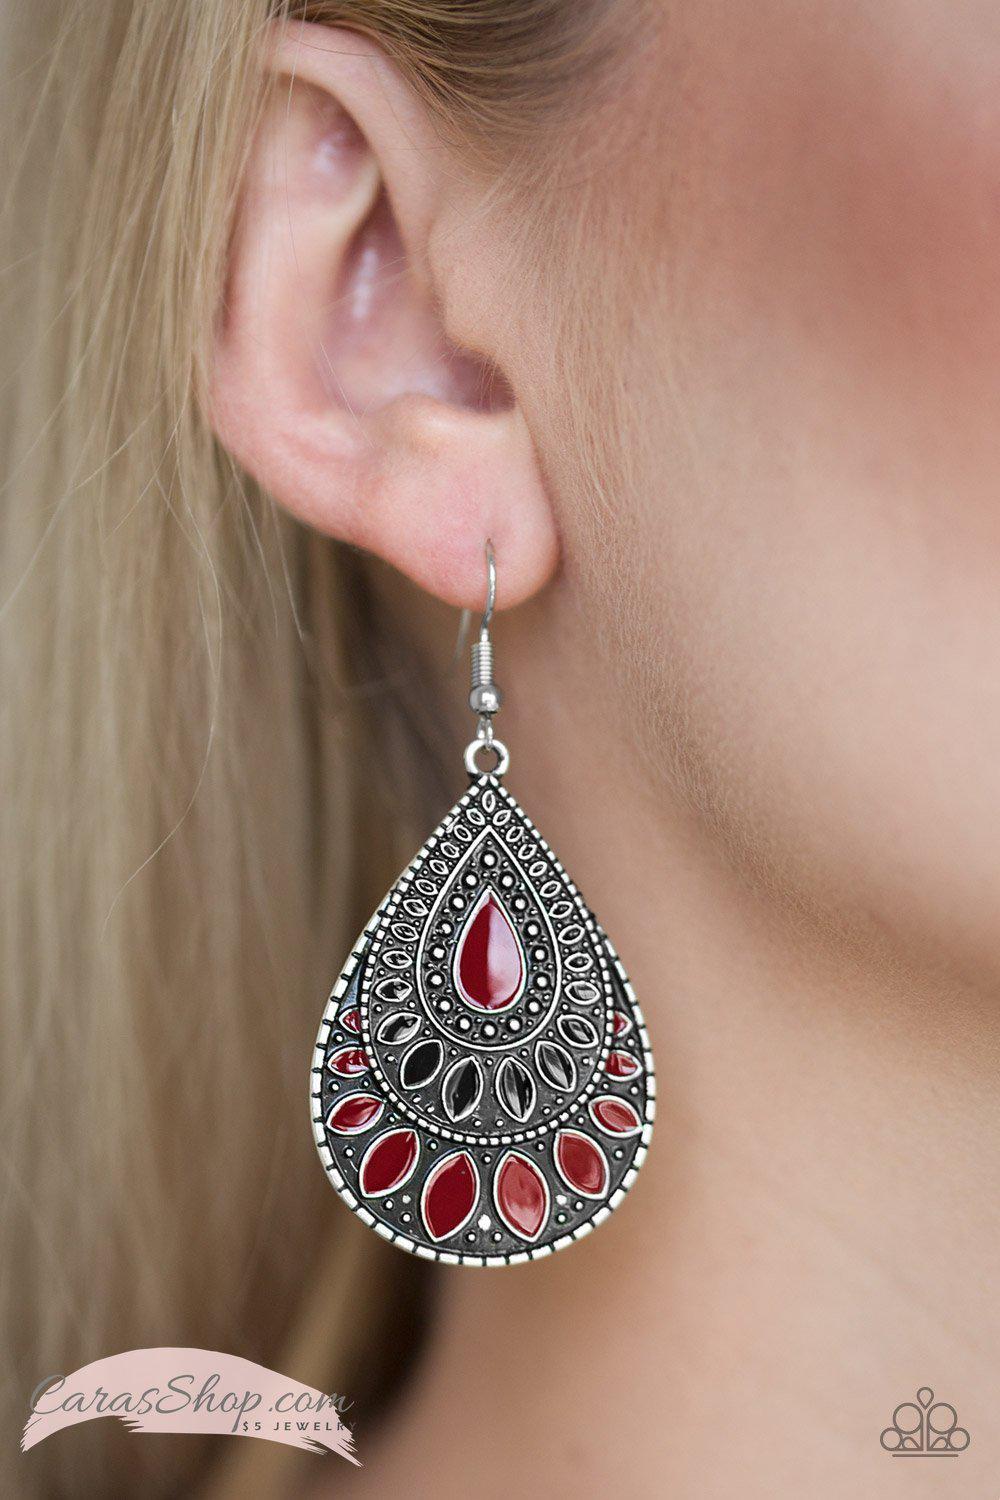 Westside Wildside Red and Black Teardrop Earrings - Paparazzi Accessories-CarasShop.com - $5 Jewelry by Cara Jewels